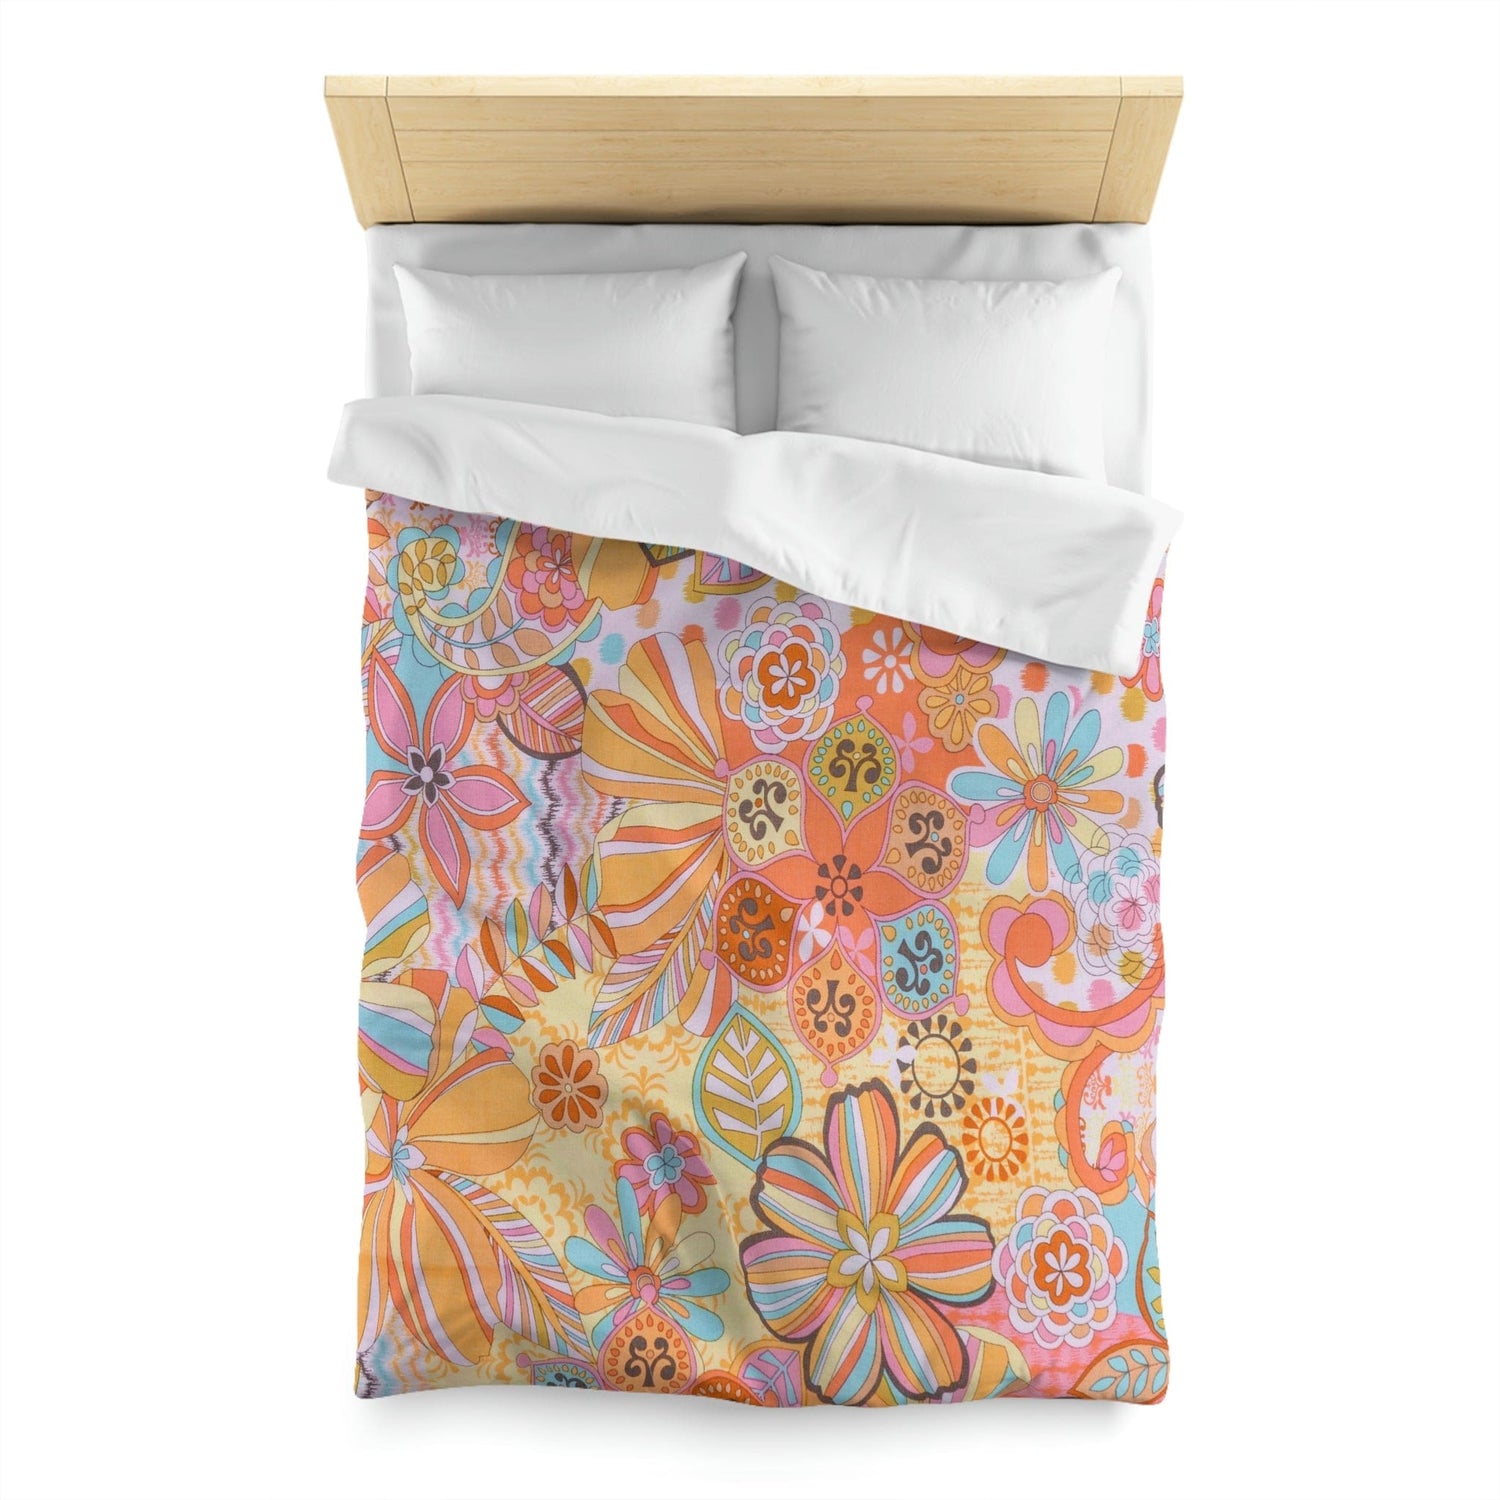 Kate McEnroe New York Retro Trippy Flower Power Duvet Cover, 70s Mid Mod Hippie Chic Floral Bedroom Decor with Groovy Orange, Yellow, and Blue PaletteDuvet Covers33031651164871971217